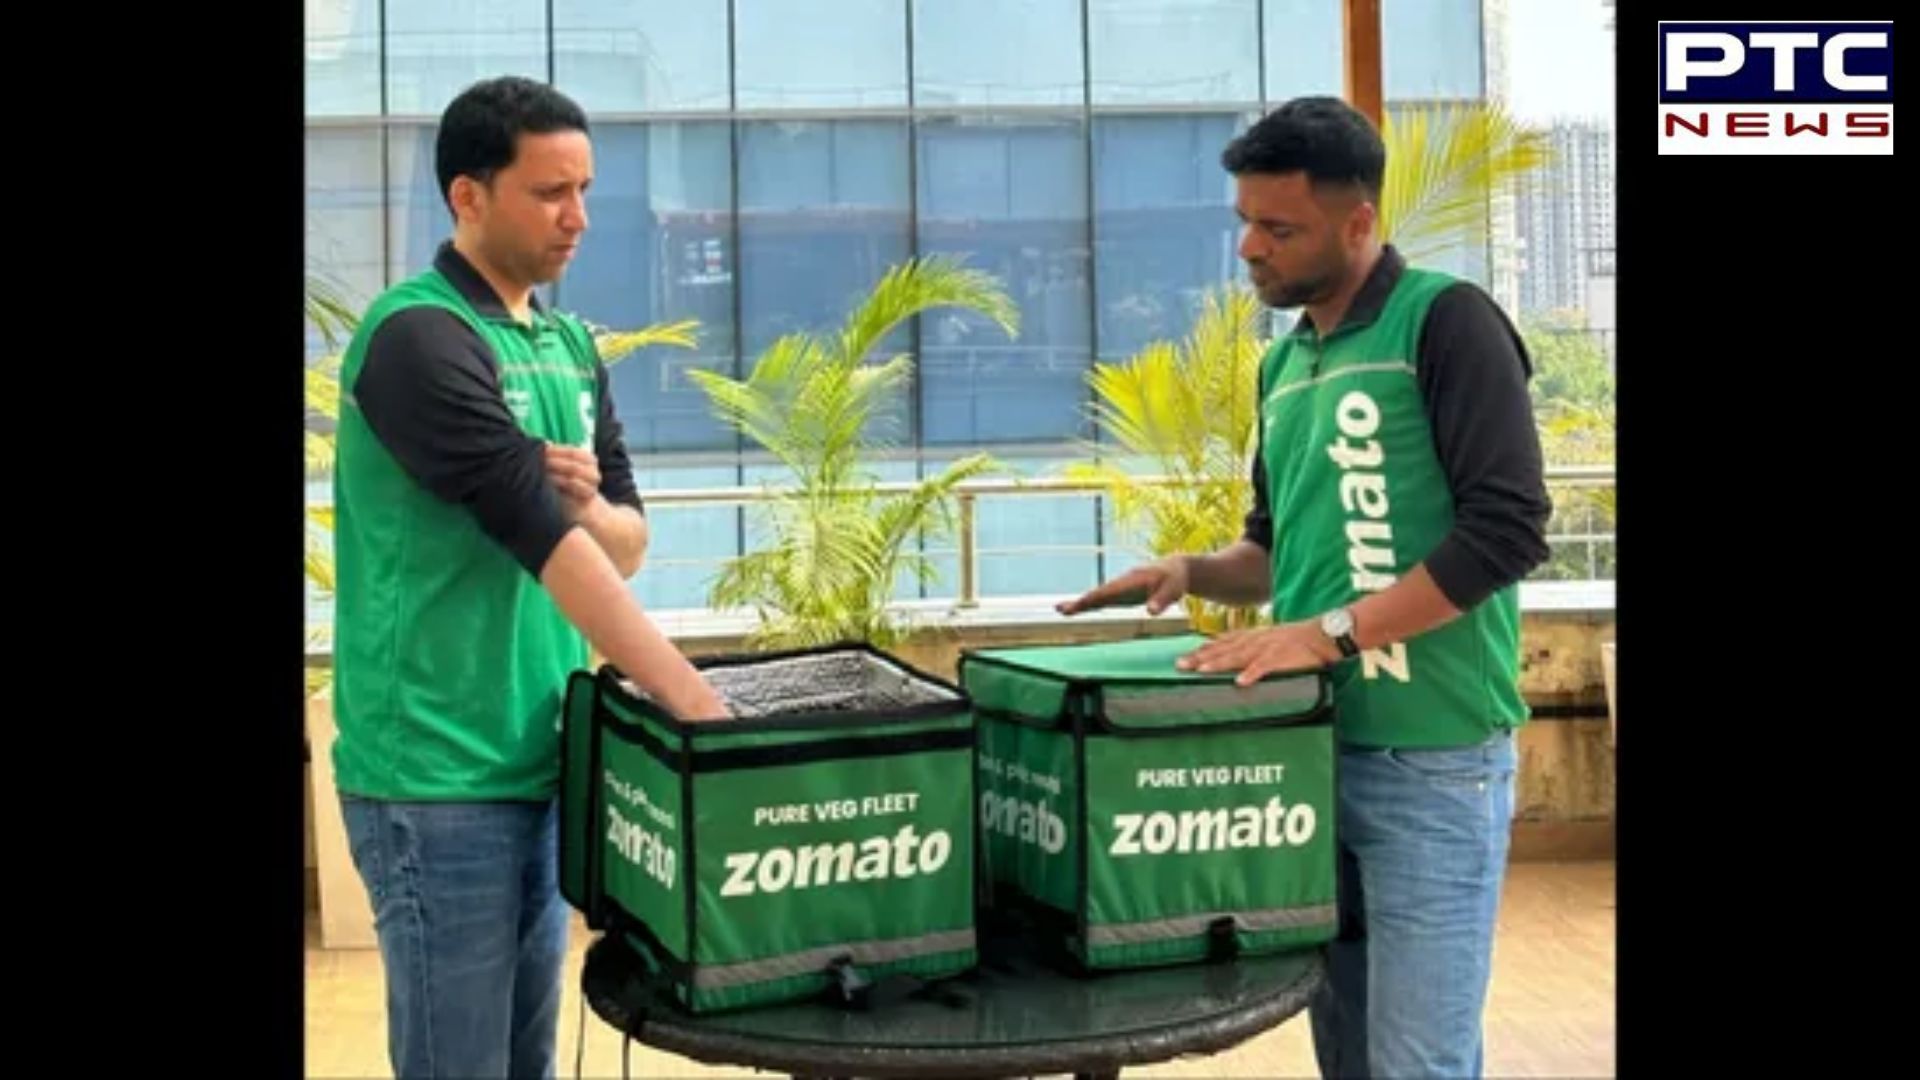 Zomato introduces 'pure veg mode' and dedicated vegetarian fleet; Deepinder Goyal joins delivery efforts